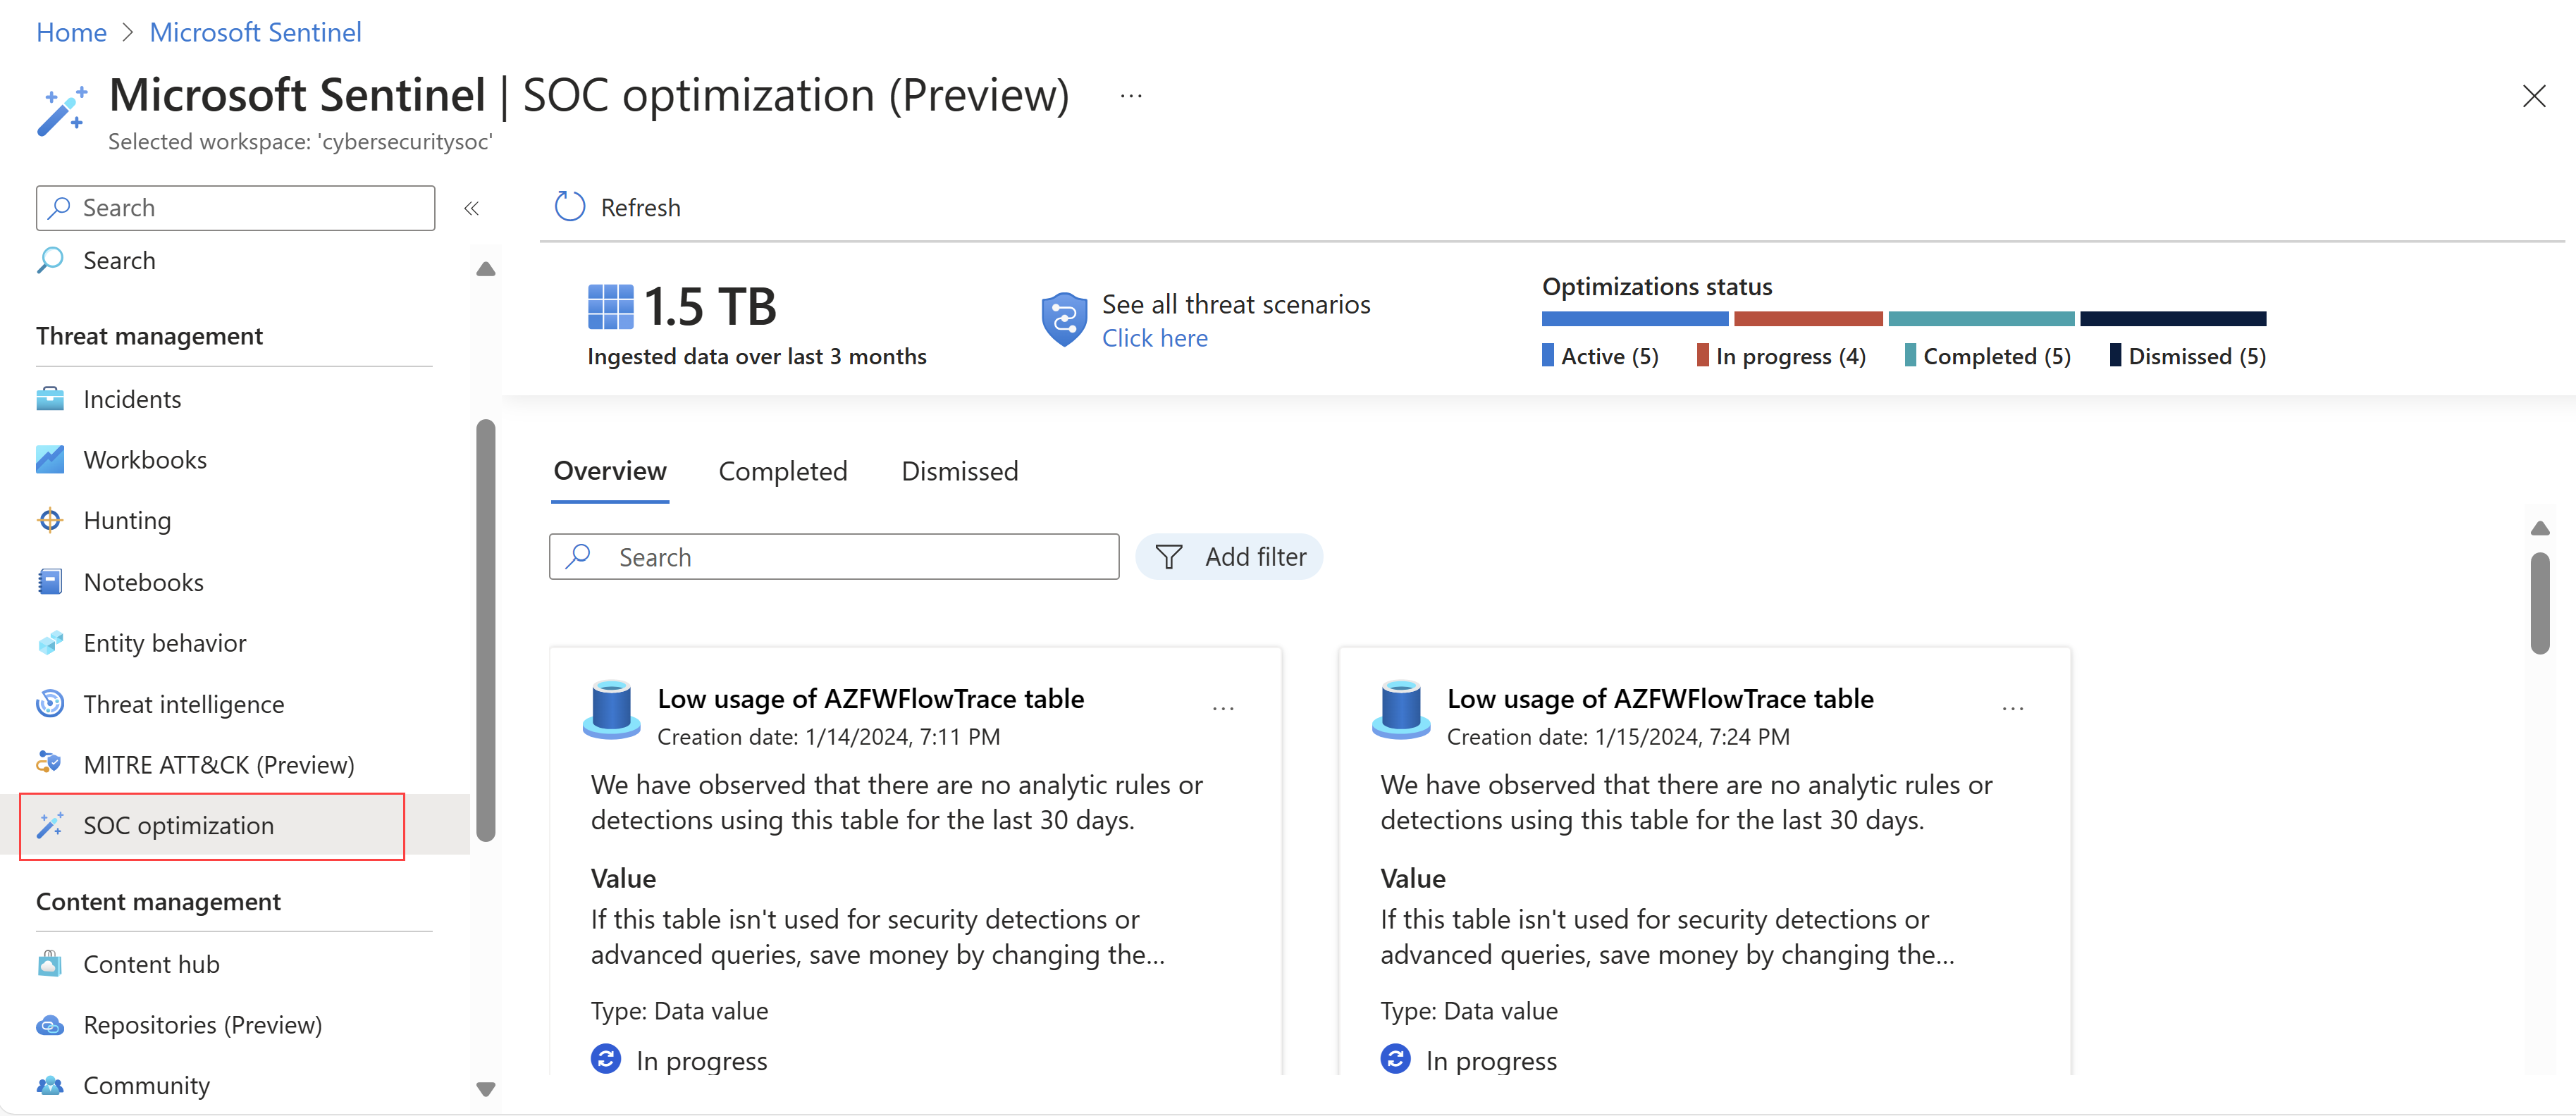 Screenshot of the SOC optimization page in the Azure portal.